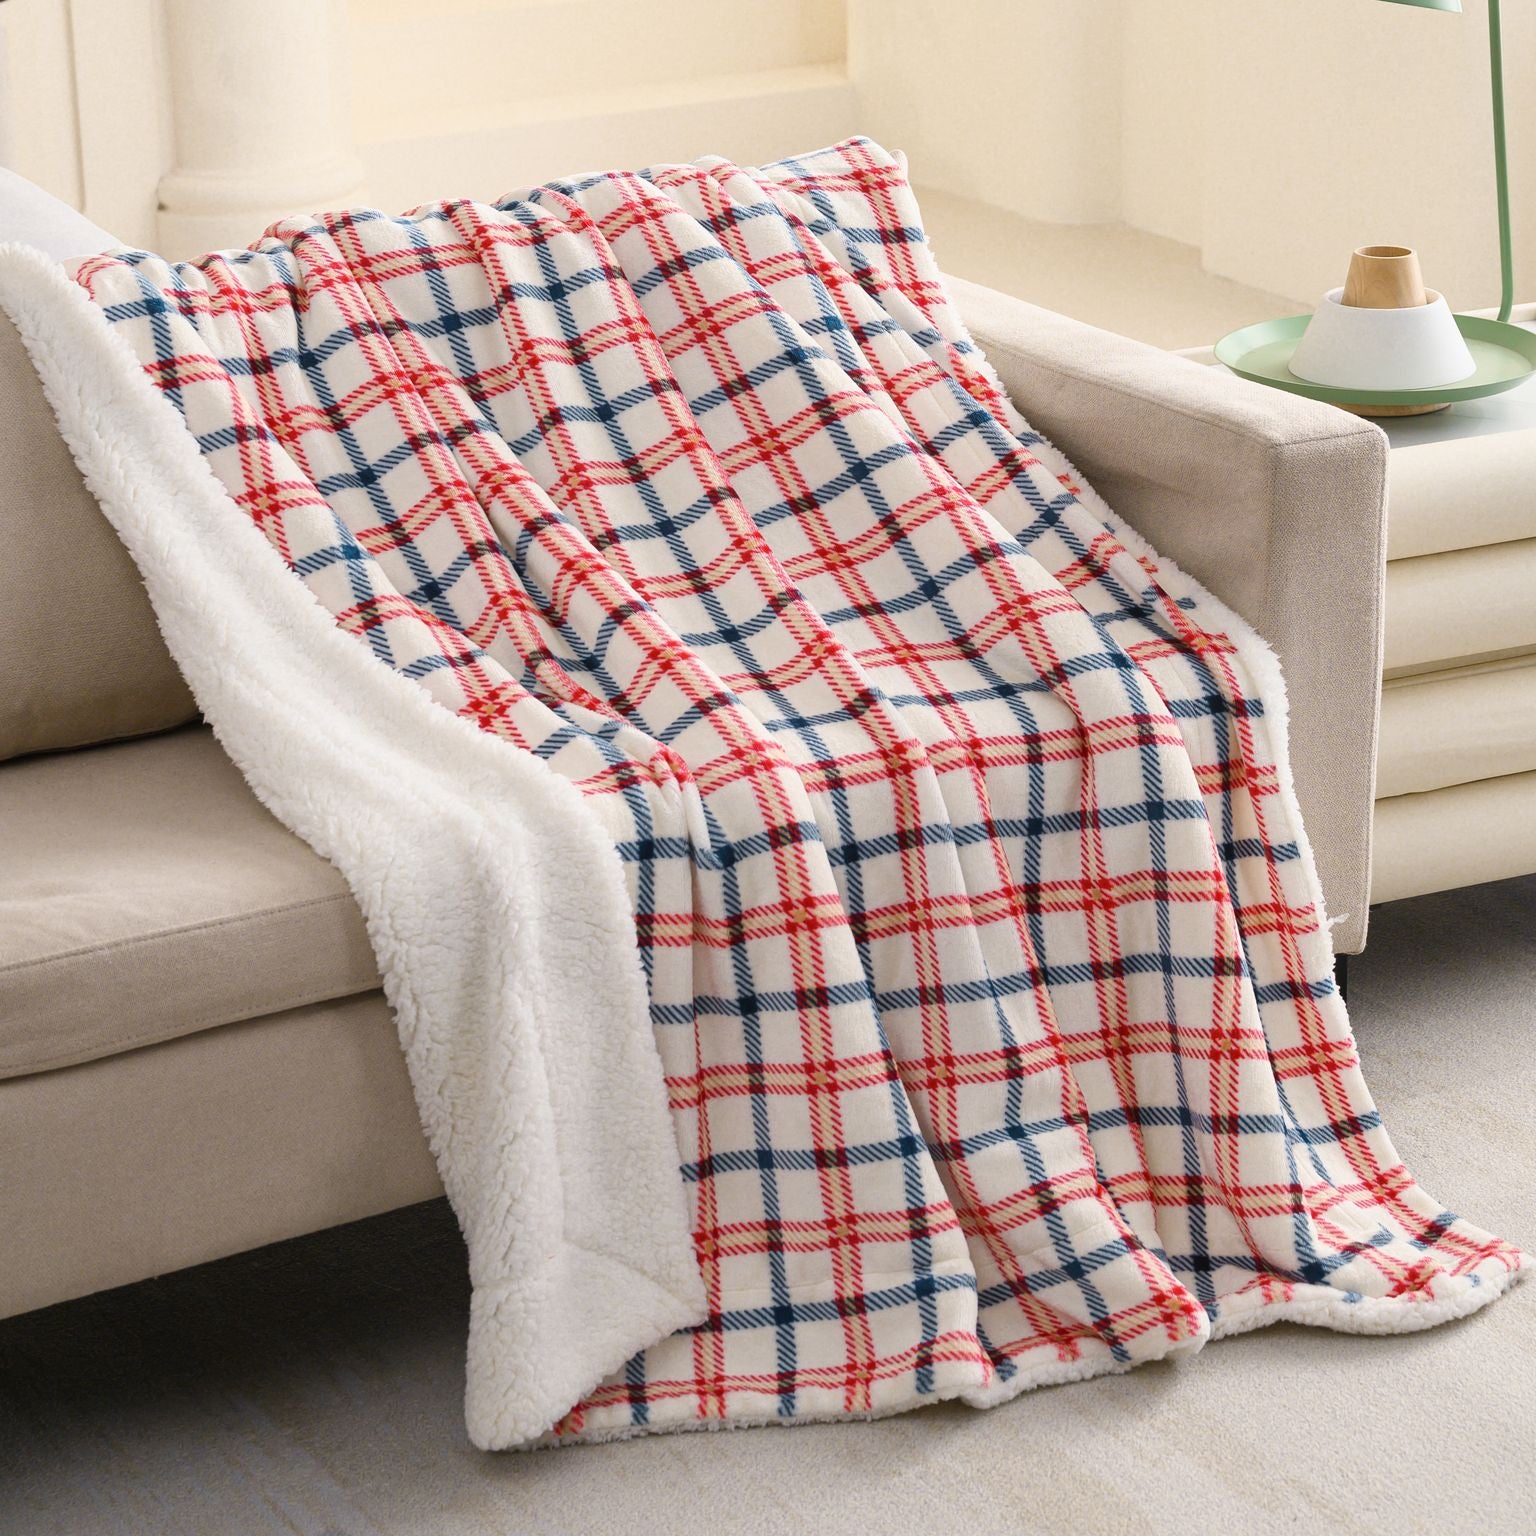 Printed Velvet to Solid Sherpa Throw Blanket 50 x 60 inches Caulli Plaid